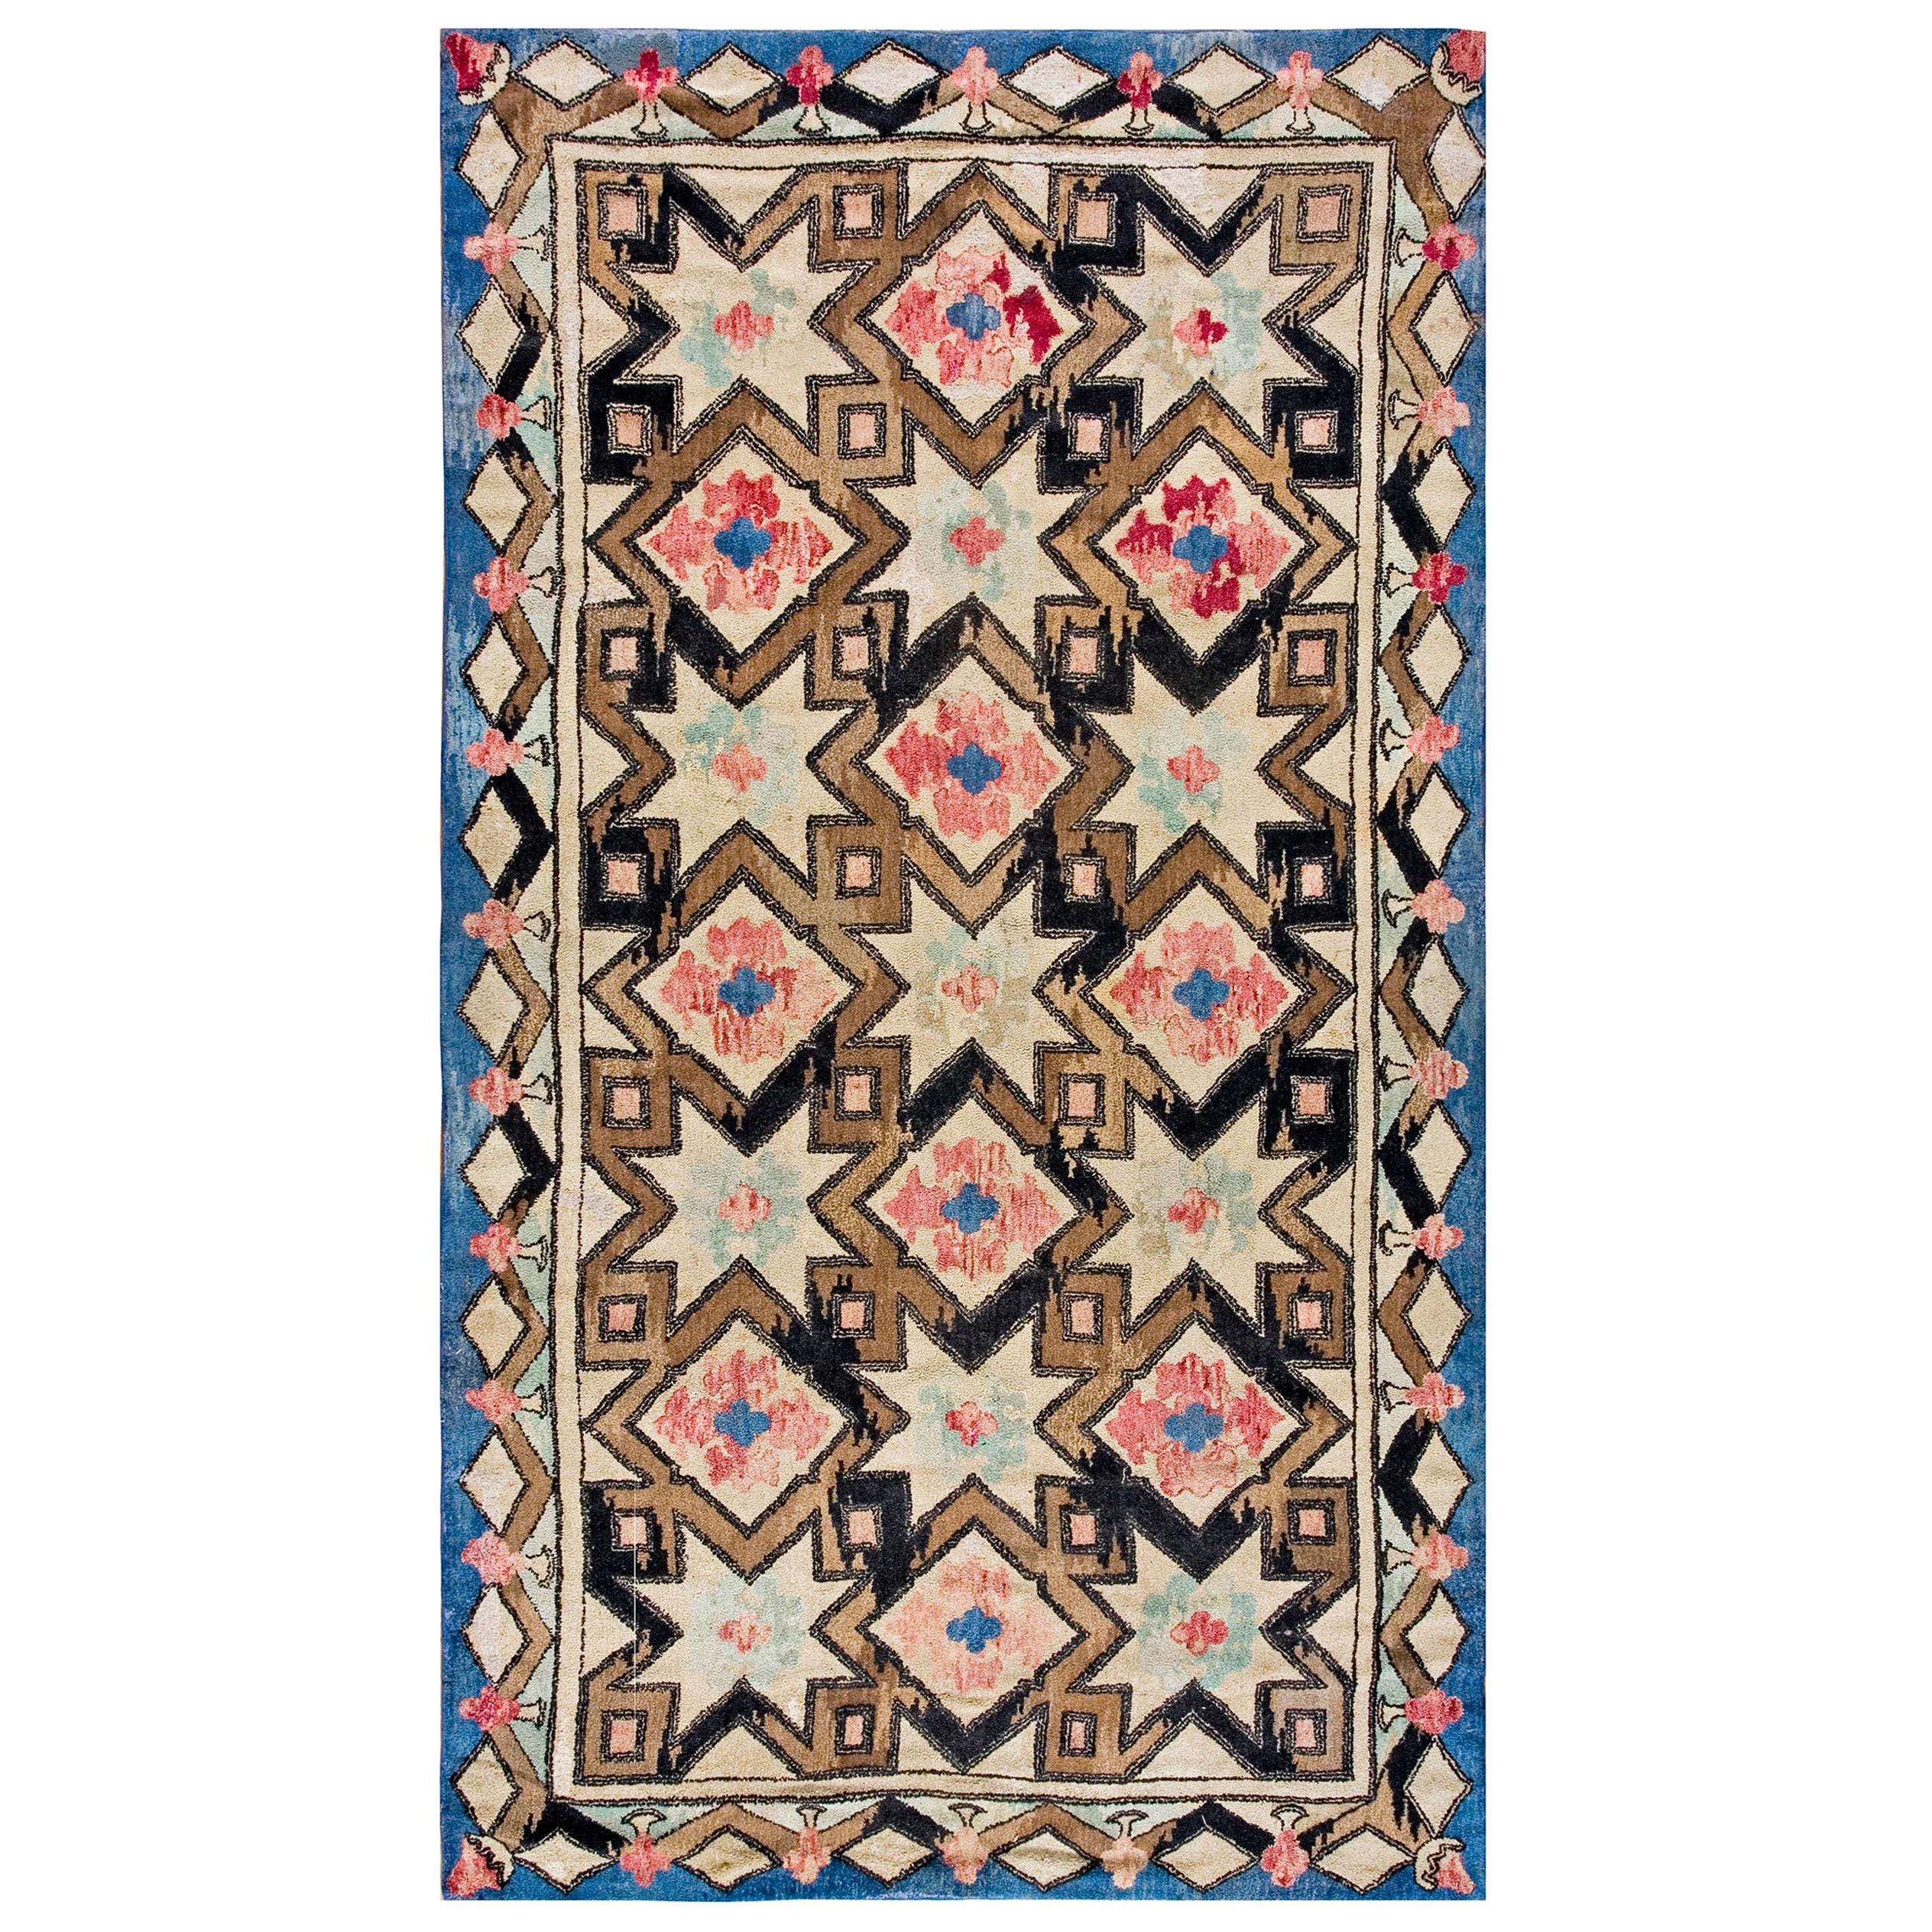 Antique American Hooked Rug 8' 4" x 14' 4" For Sale